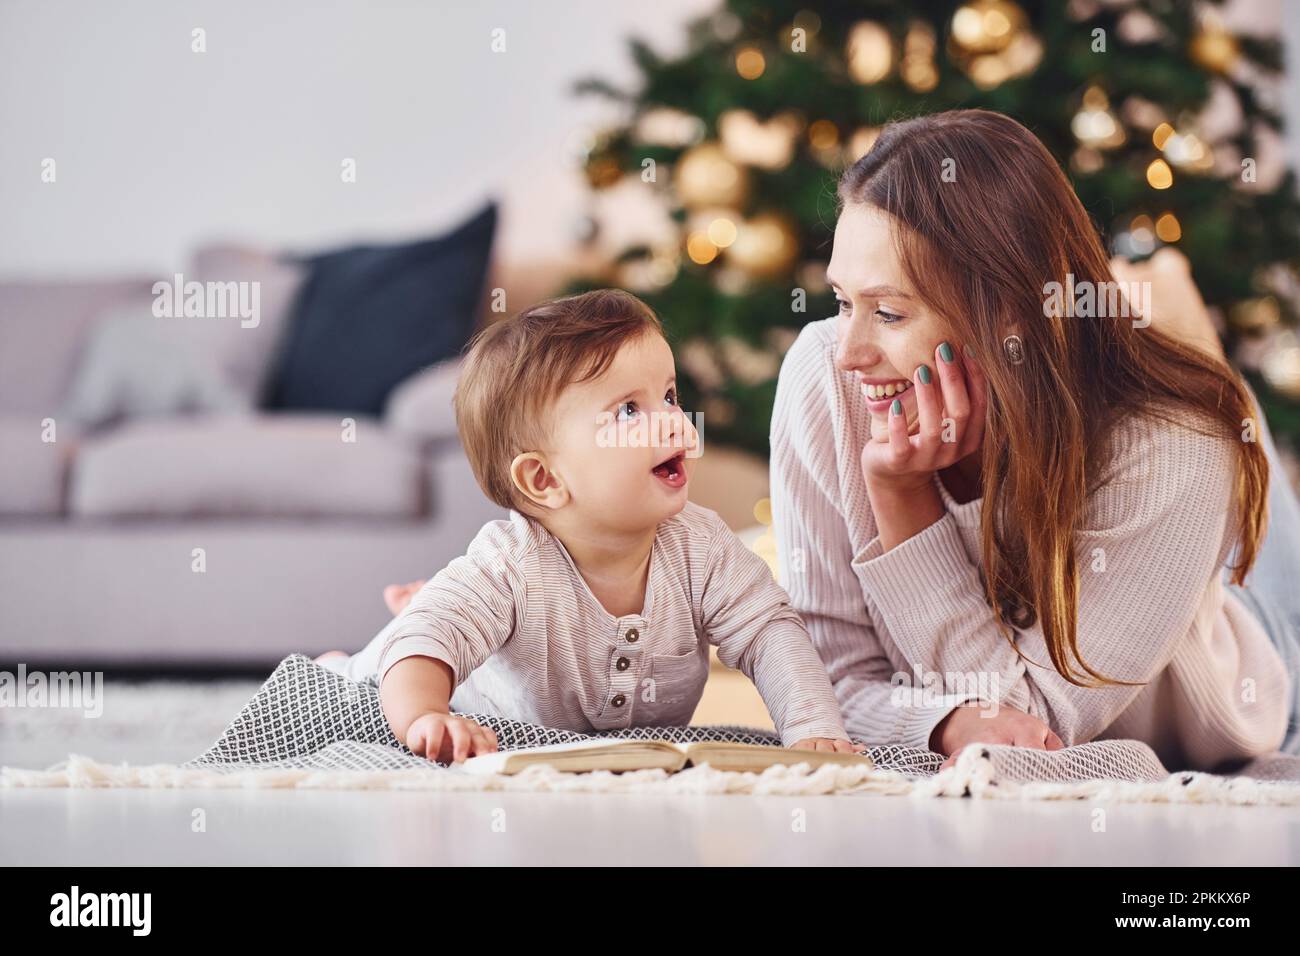 With book that is on the ground. Mother with her little daughter is indoors at home together. Stock Photo